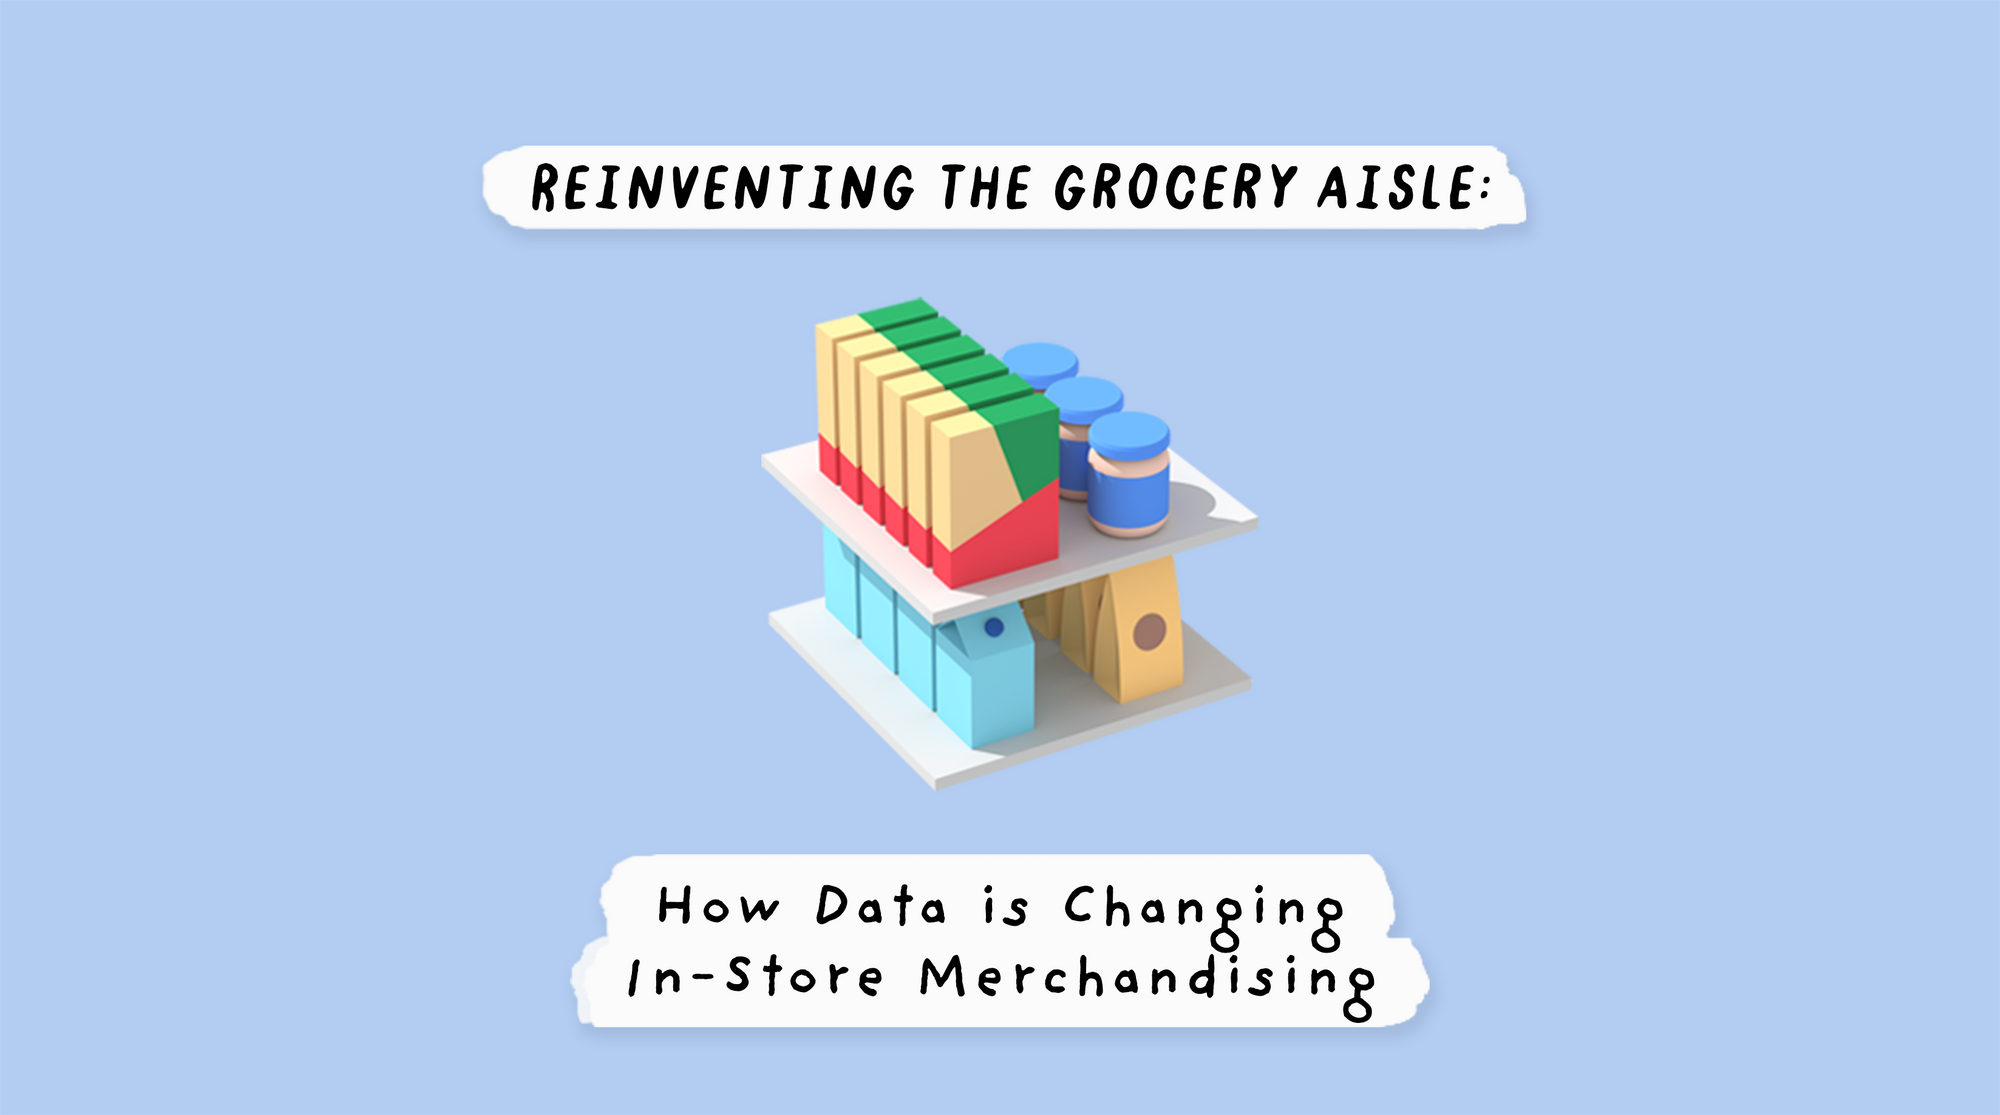 Reinventing the Grocery Aisle: How Data is Changing In-Store Merchandising